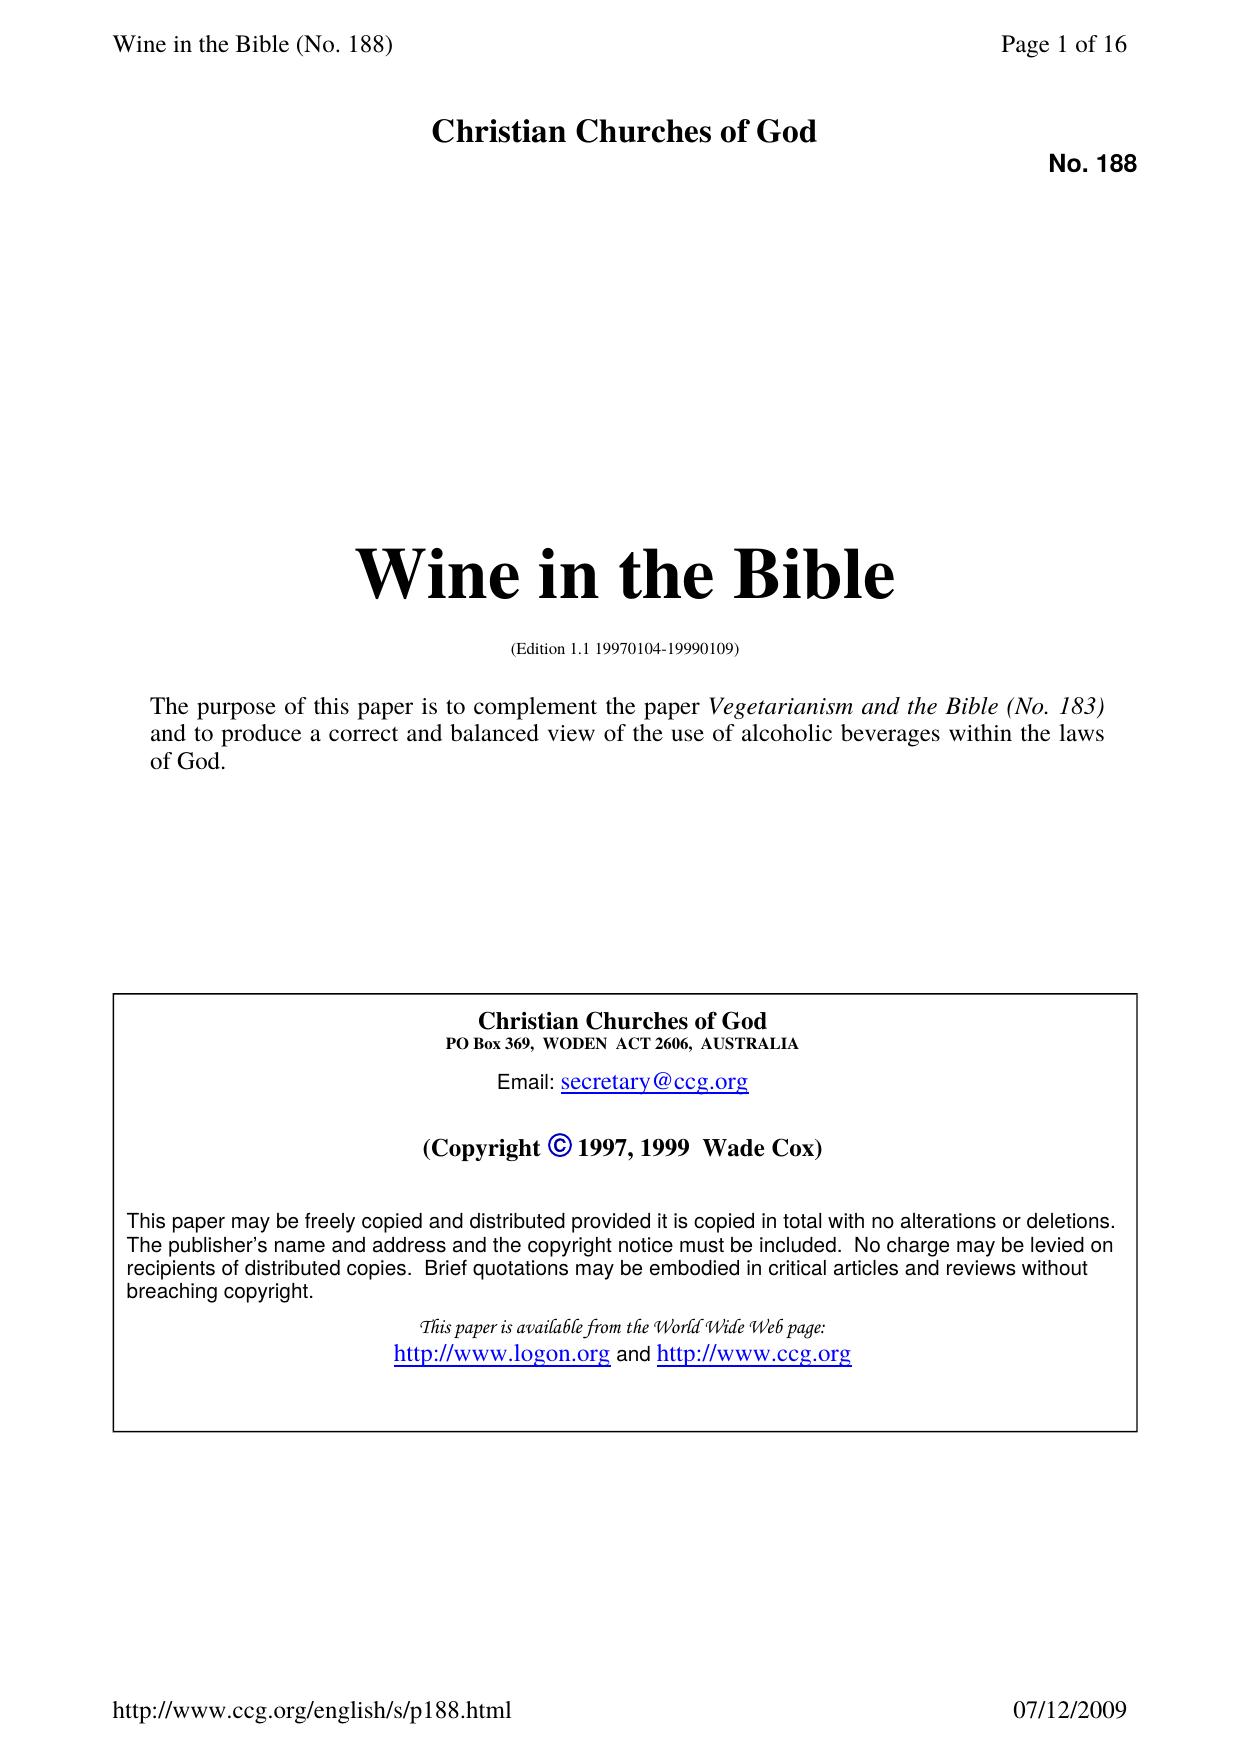 24- Wine in the Bible (Christian Churches of God) by Unknown